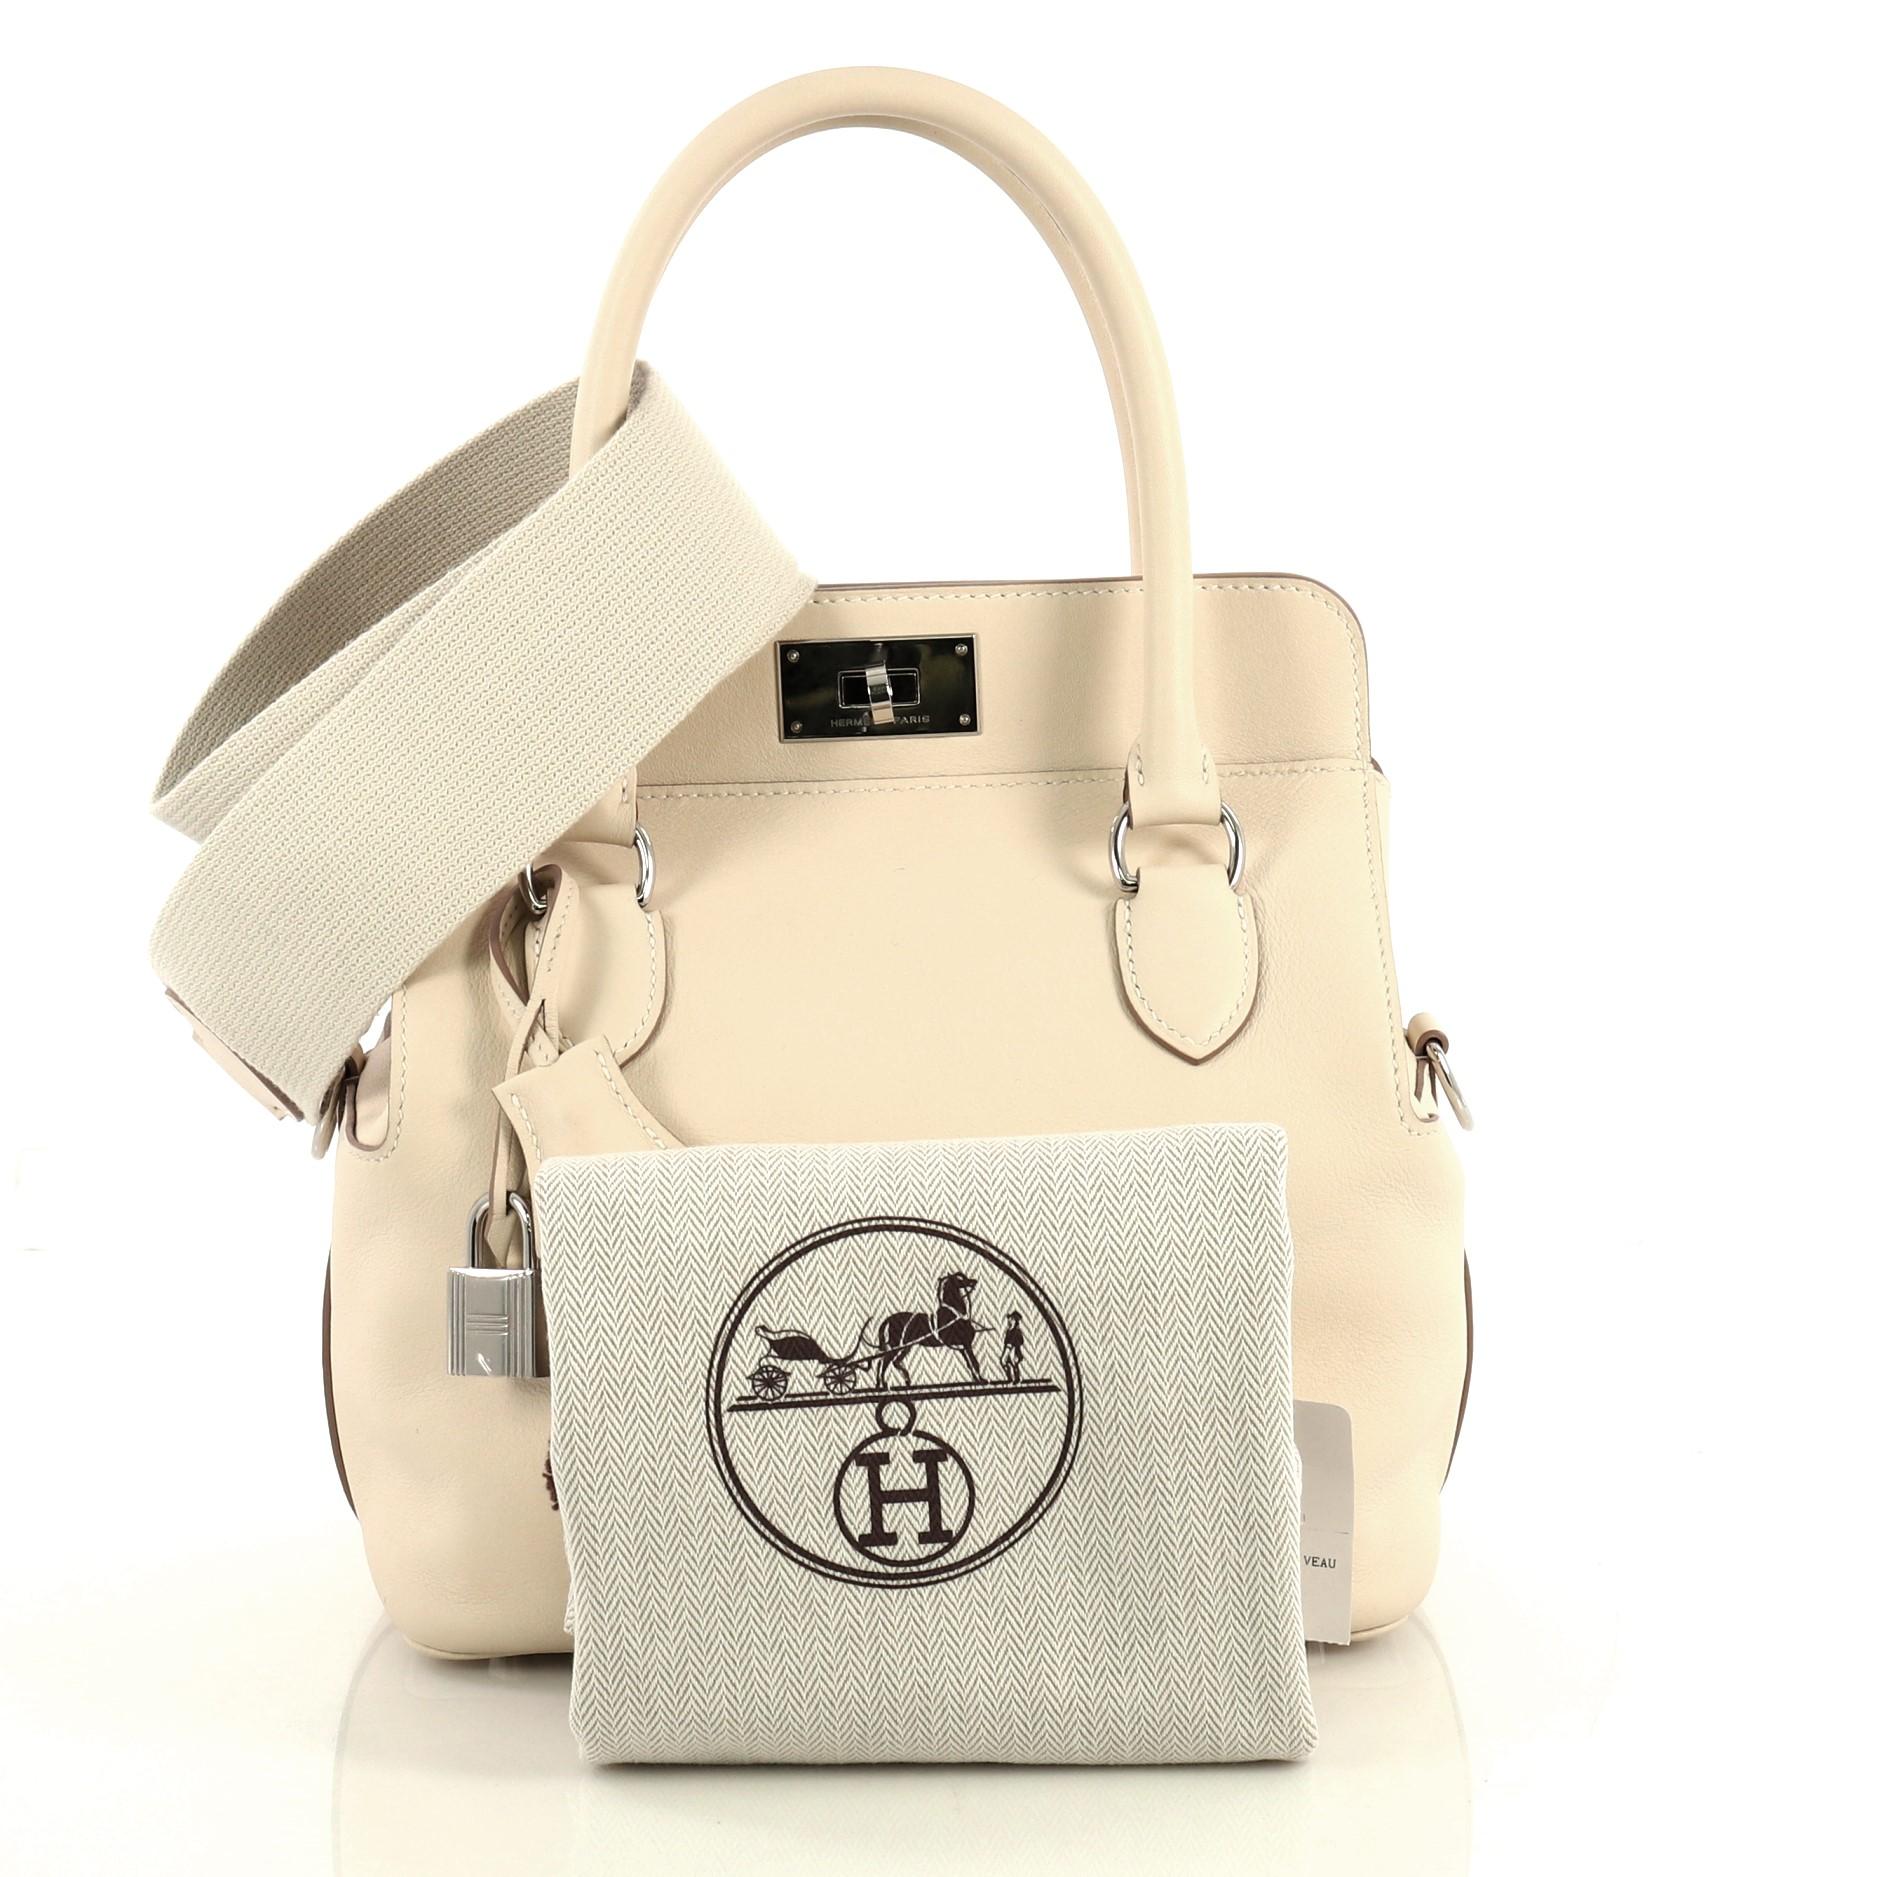 This Hermes Toolbox Handbag Swift 20, crafted from Craie neutral Swift leather, features dual rolled top handles, soft framed top, and palladium hardware. Its turn-lock closure opens to a Craie neutral Swift leather interior with slip pockets. Date